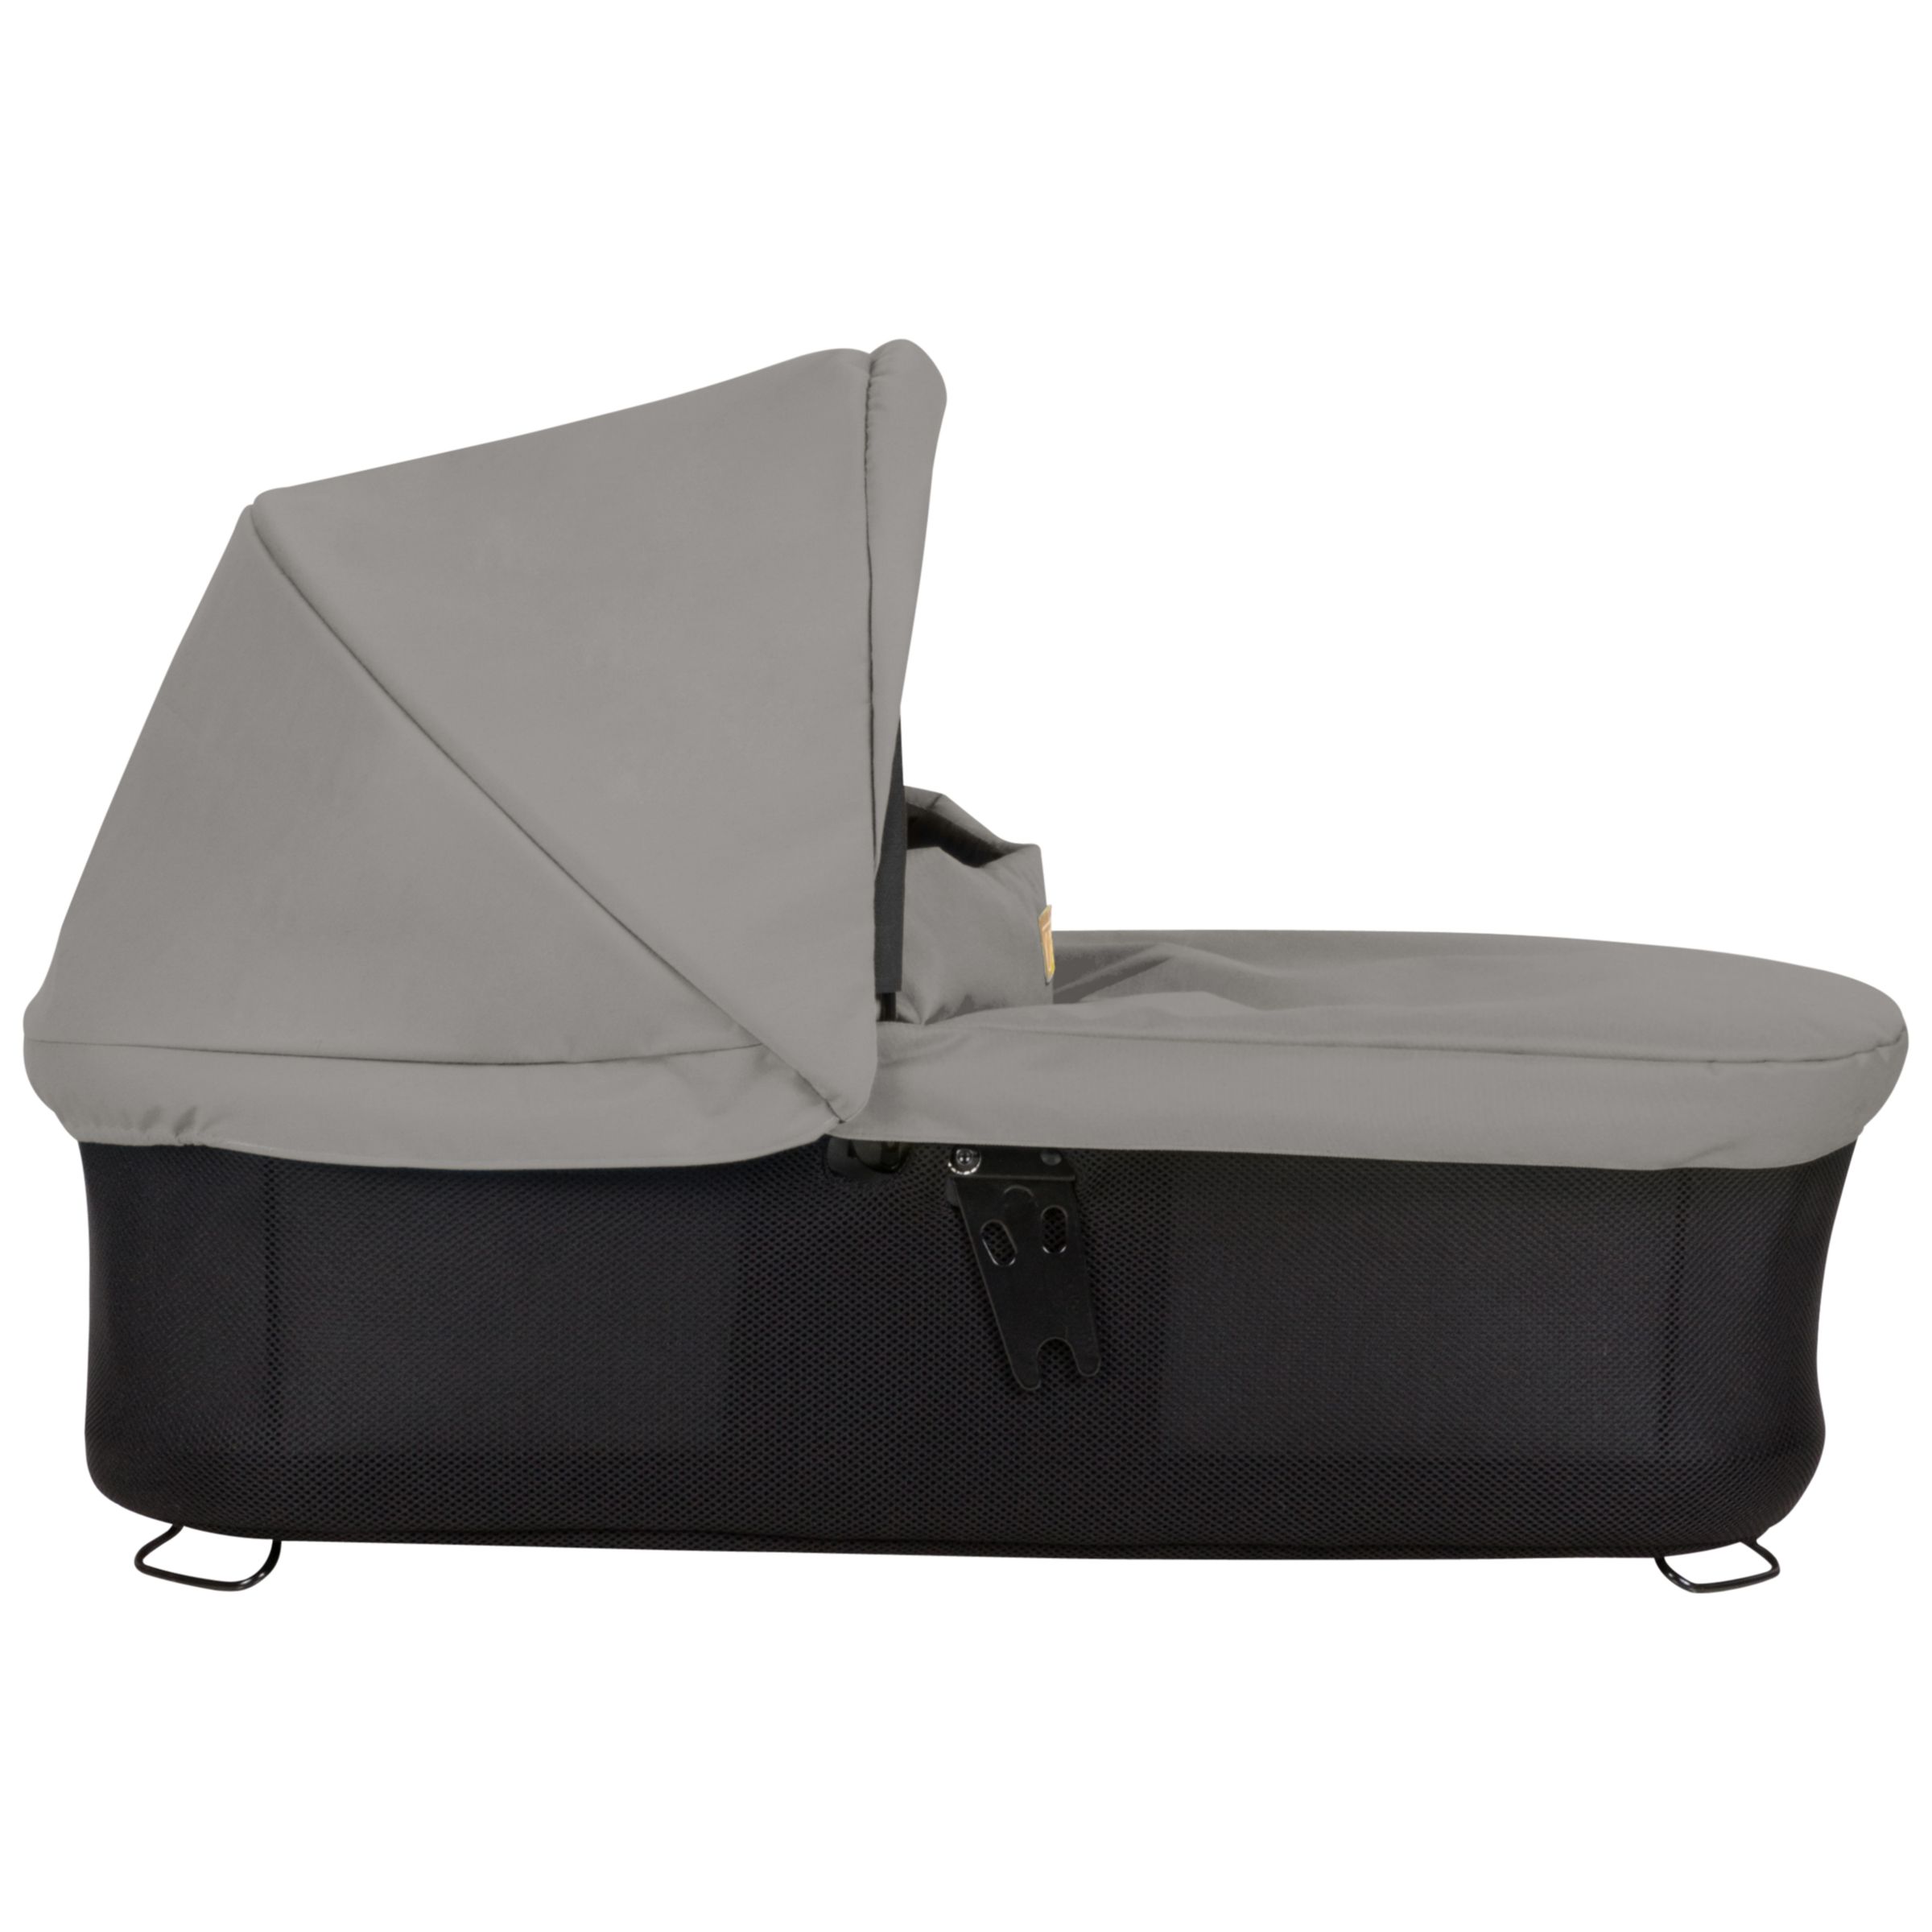 Mountain Buggy Urban Jungle Carrycot Plus, Silver